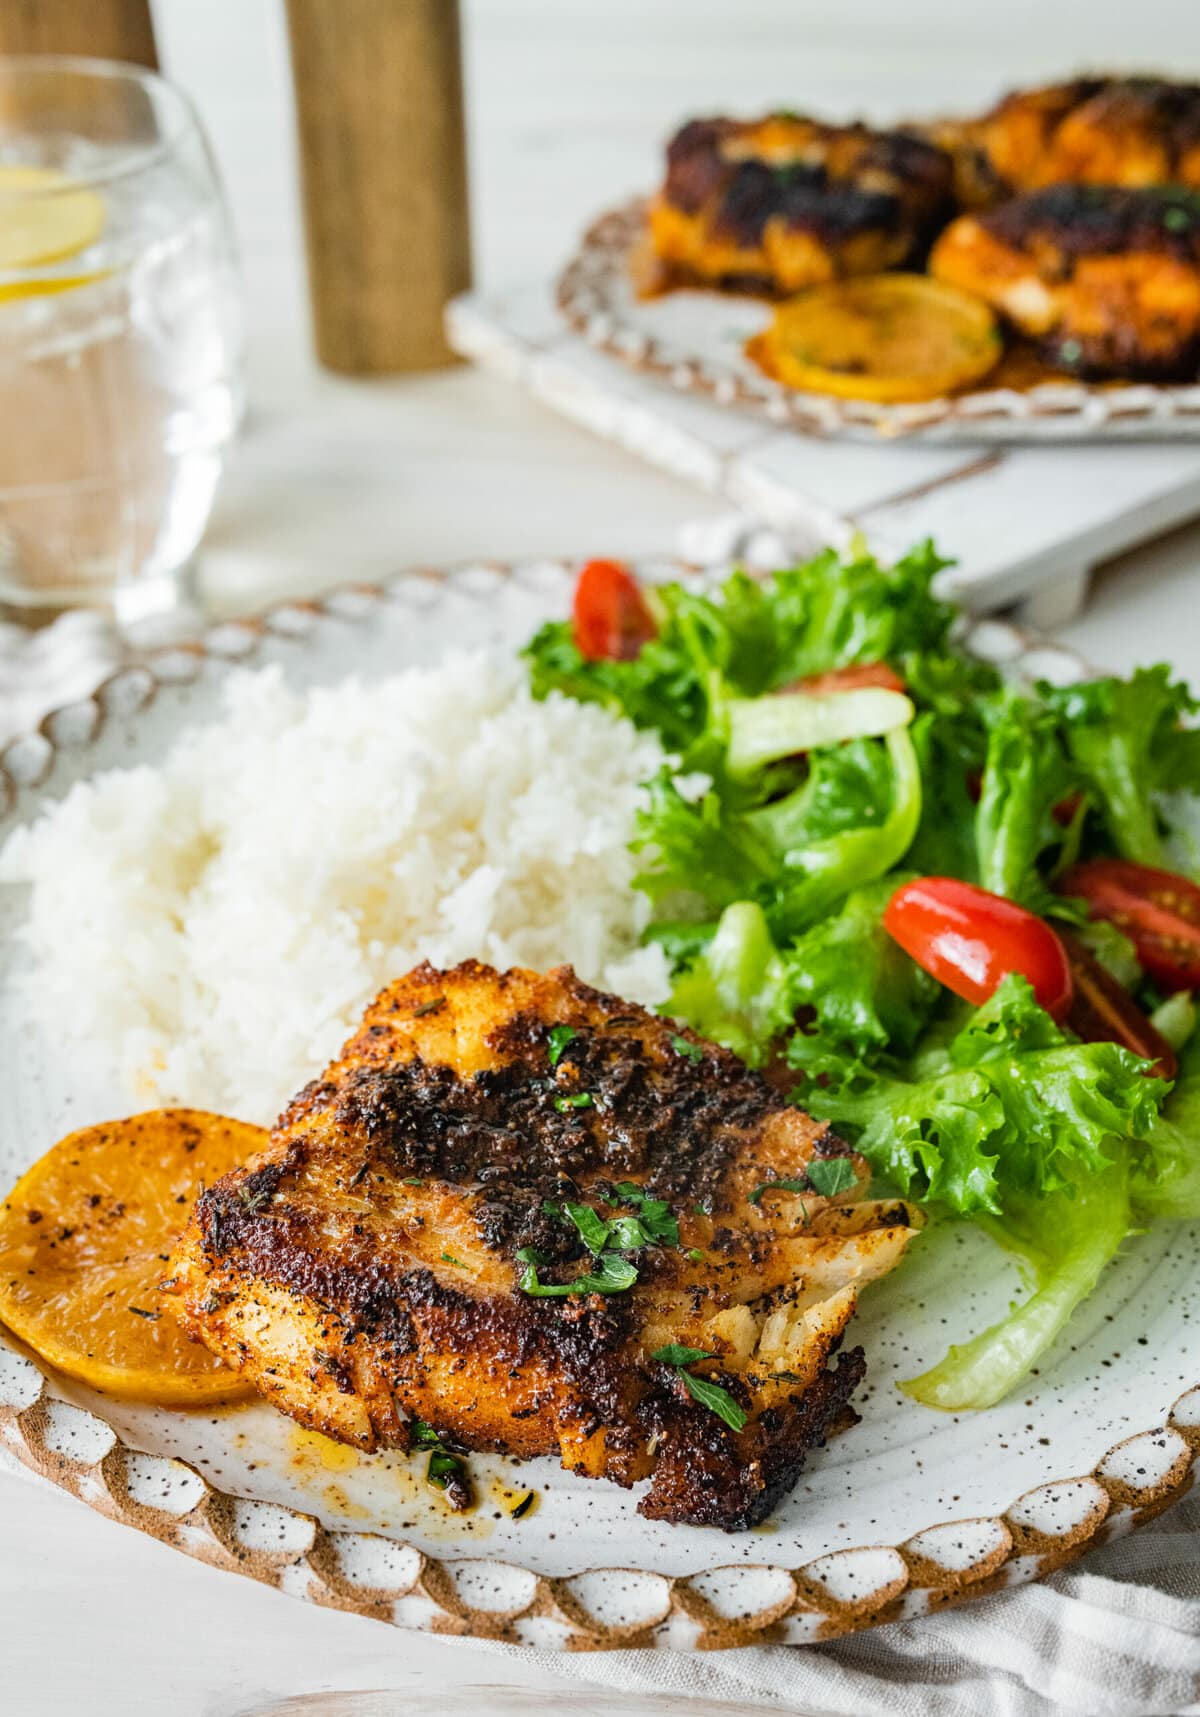 platted blackened cod with white rice and green salad with tomatoes.